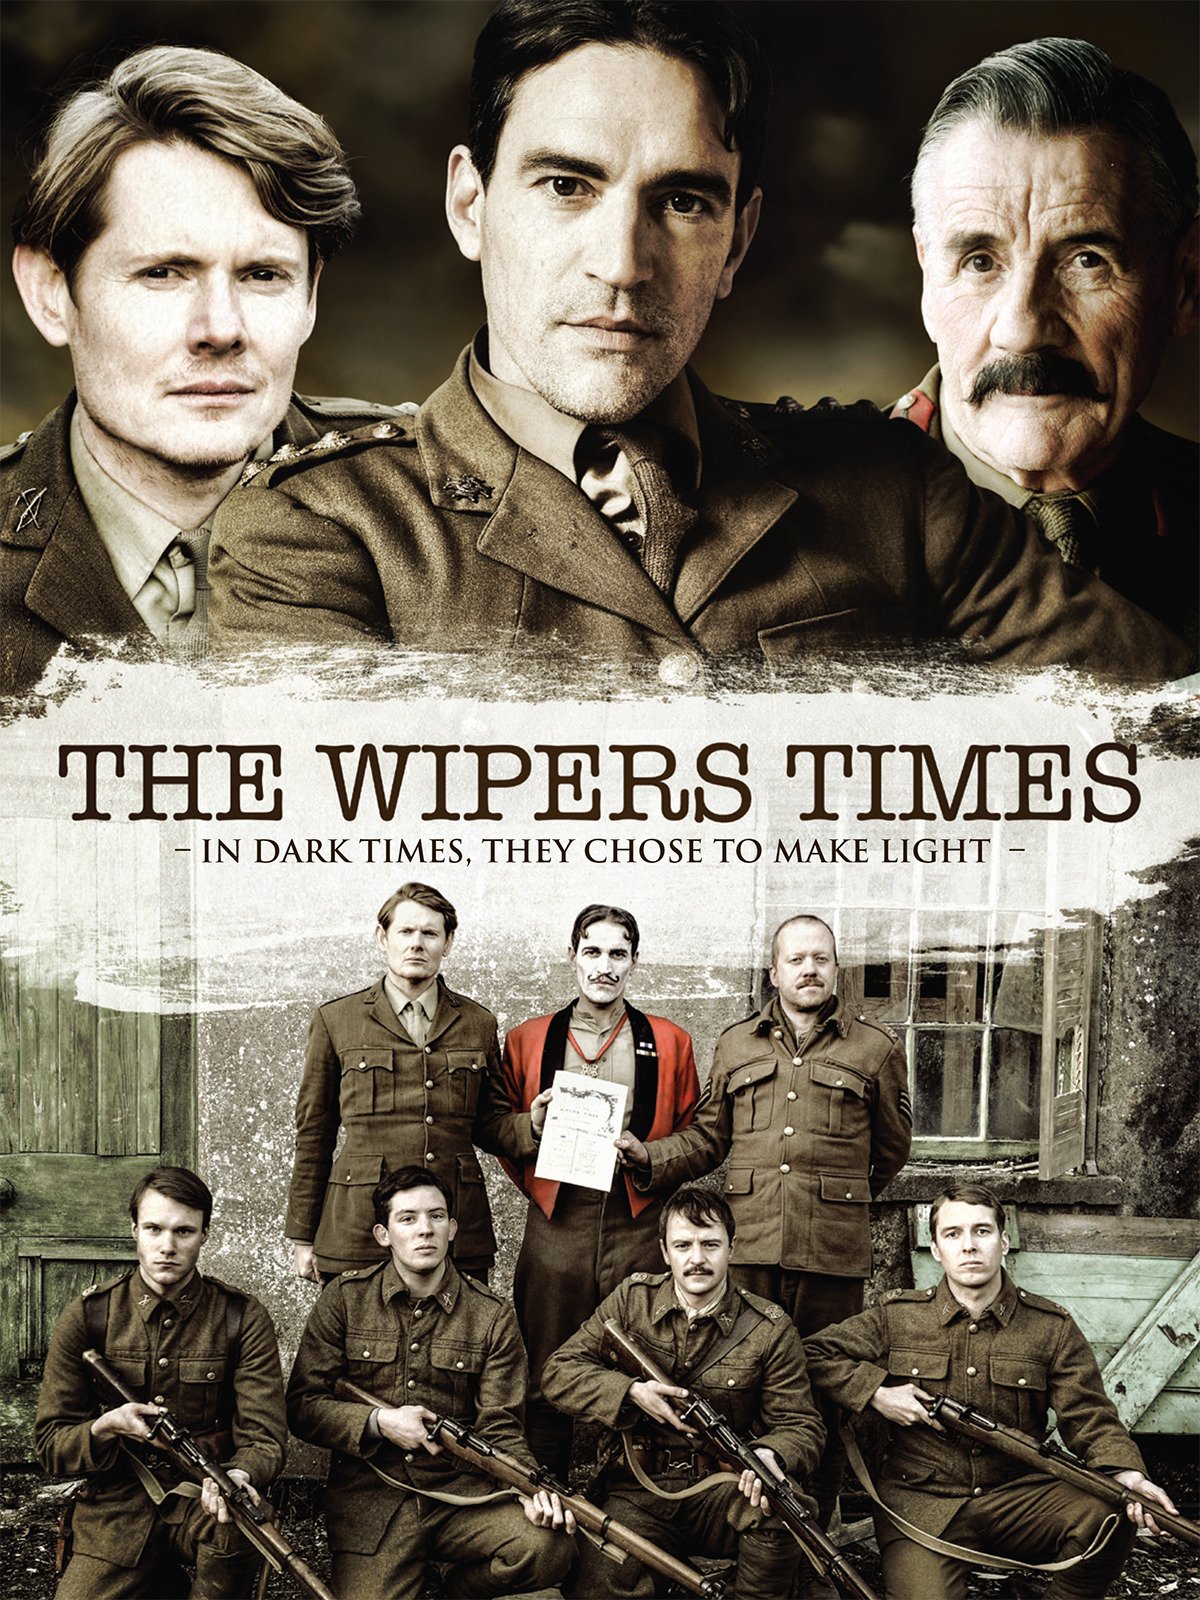 The Wipers Times (a).jpg